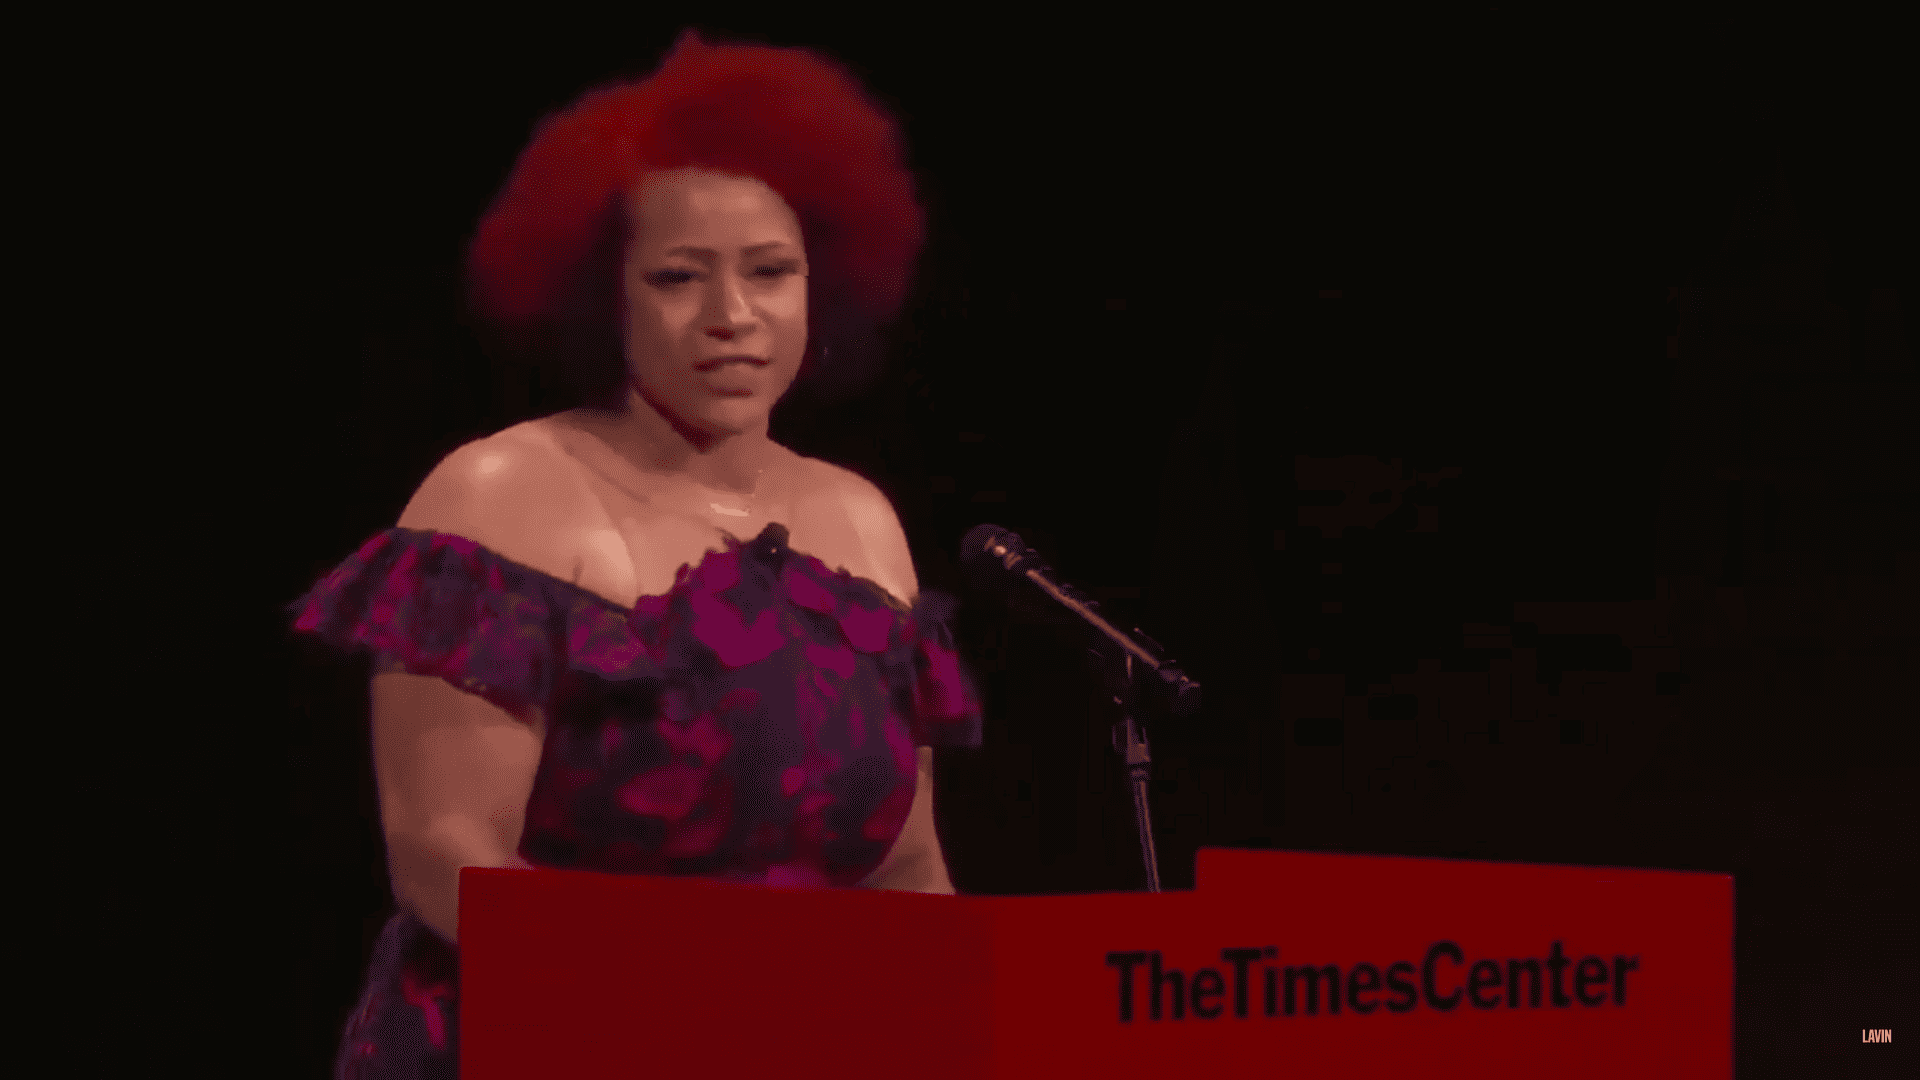 Nikole Hannah-Jones, a Black woman with curly red hair, speaking at a podium